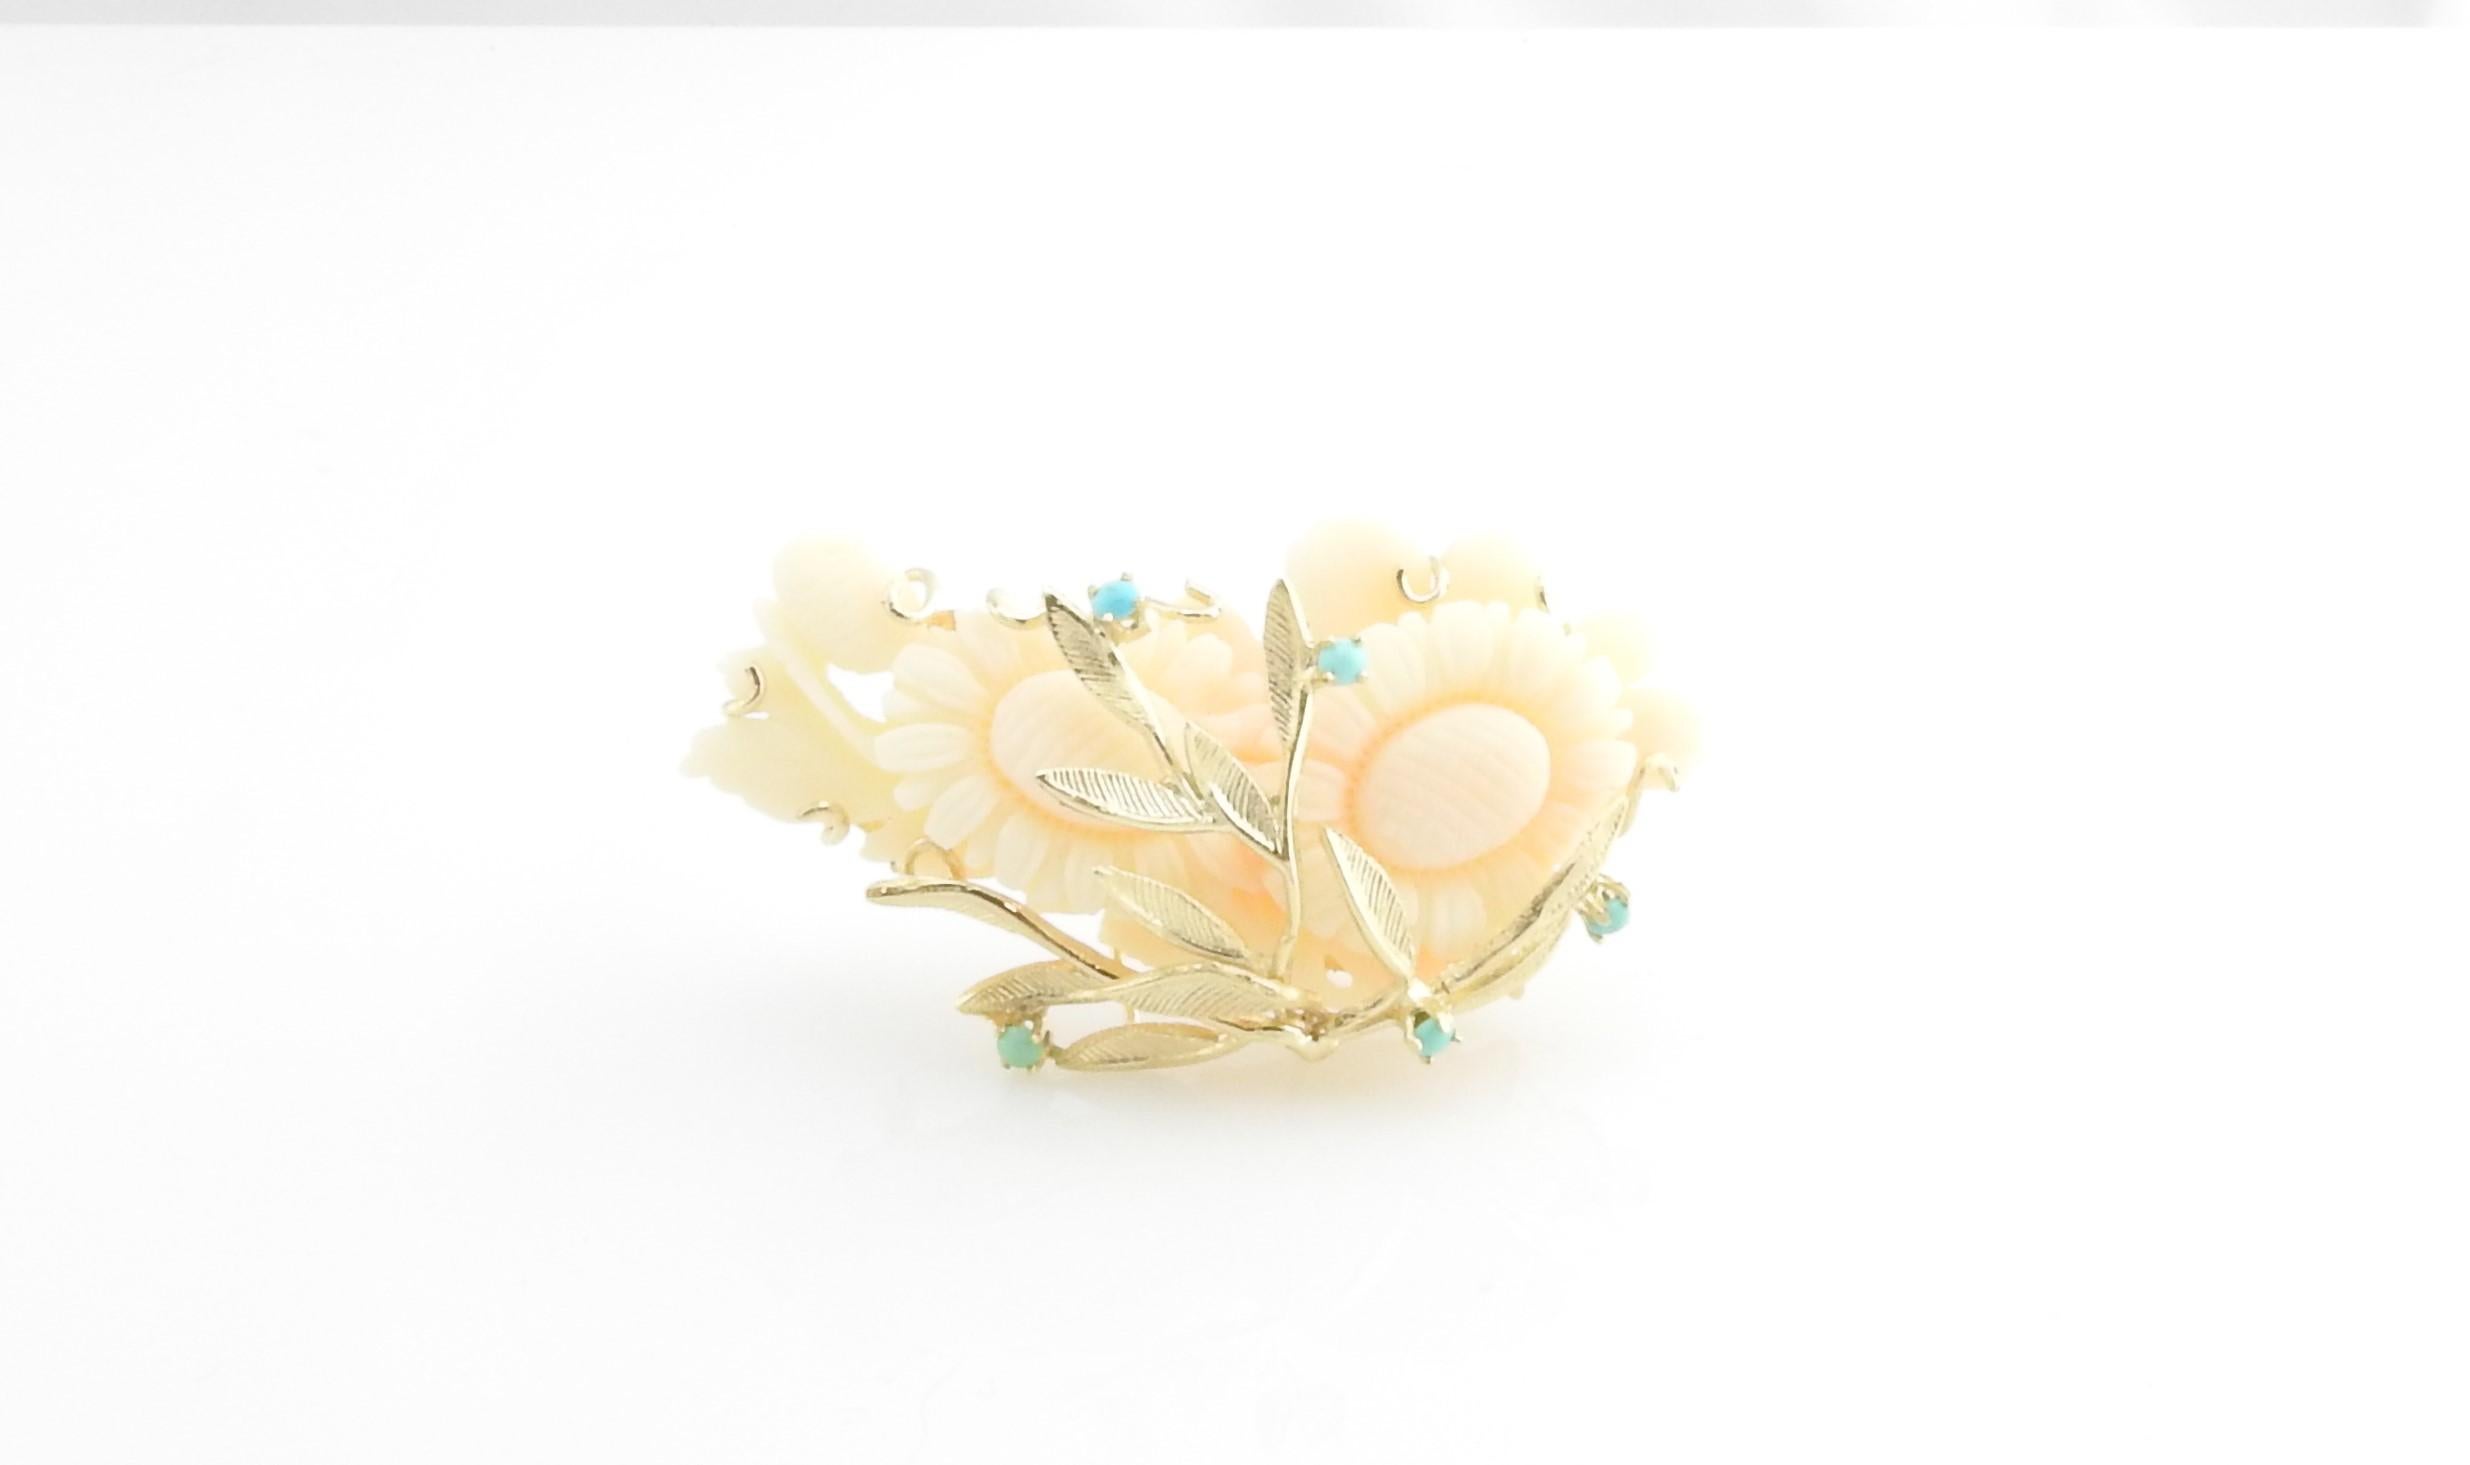 Vintage 14 Karat Yellow Gold Angel Skin Coral and Turquoise Brooch / Pin

This stunning floral brooch is crafted in lovely angel skin coral and accented with 14K yellow gold and five round turquoise gemstones.

Size: 63 mm x 35 mm

Weight: 18.7 dwt.